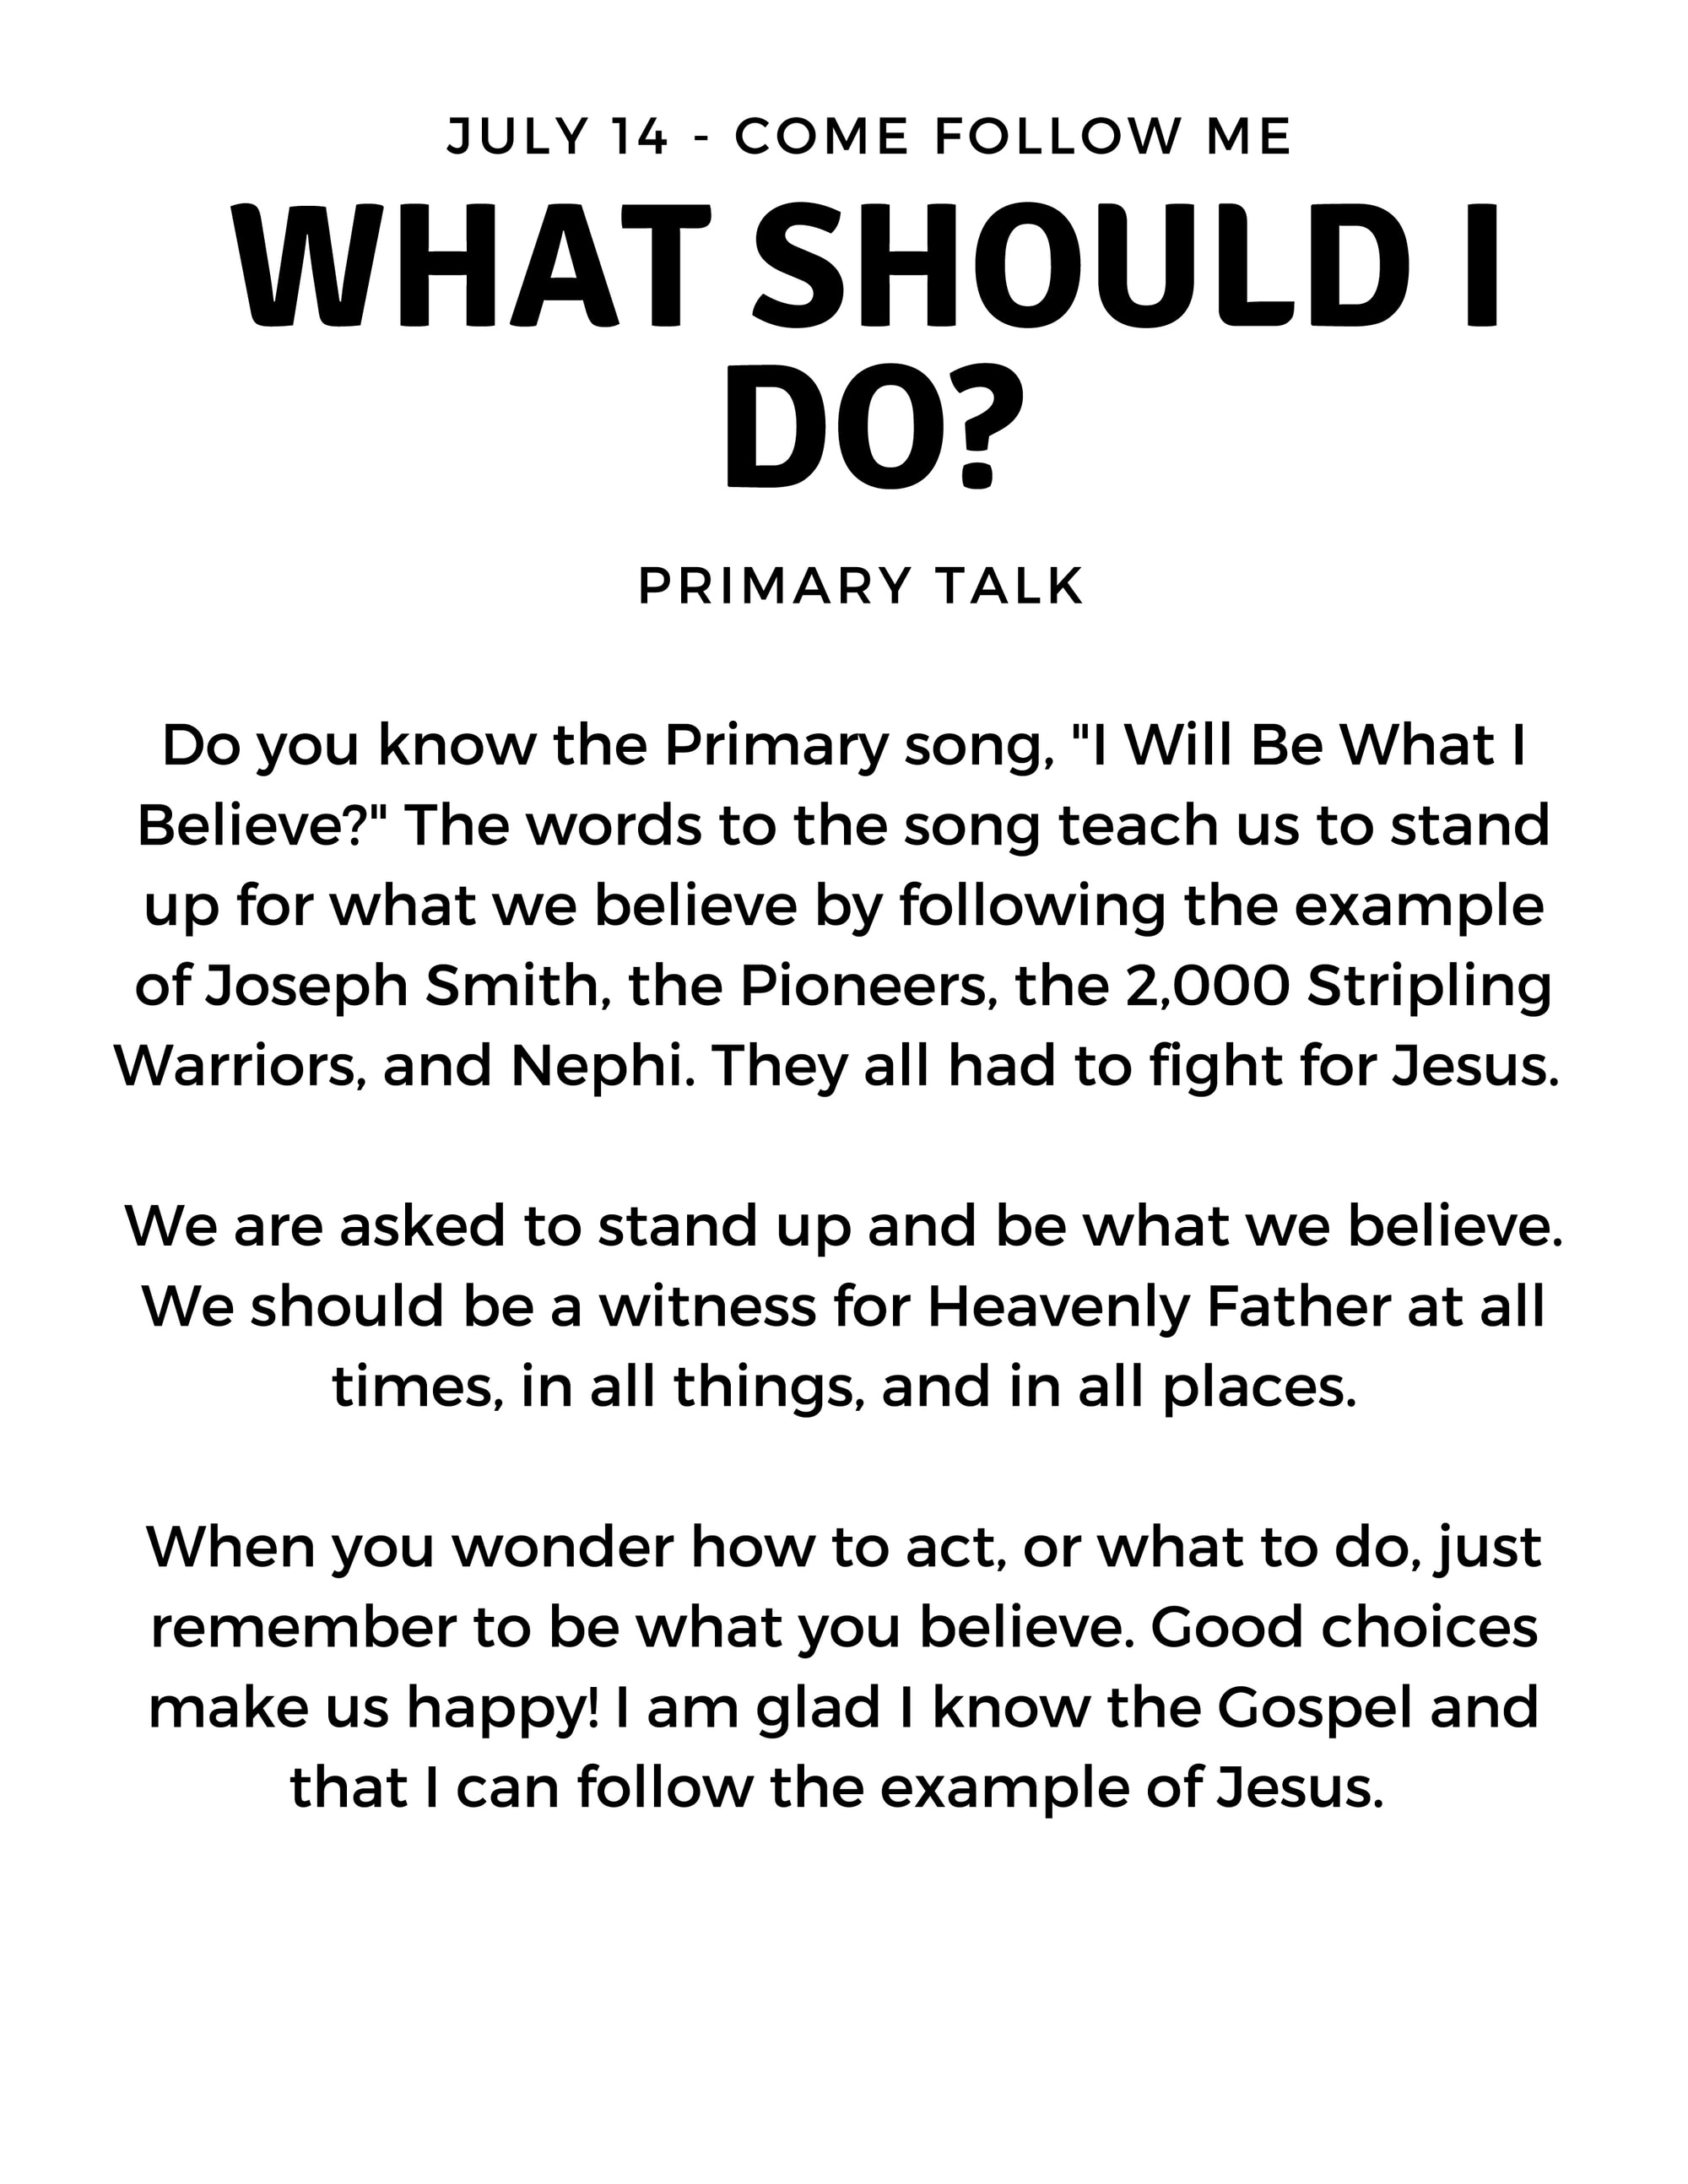 Simple One Minute Primary Talks for July Come Follow Me Theme. #OSSS #PRINTABLE #COMEFOLLOWME #TALKFORCHURCH www.orsoshesays.com